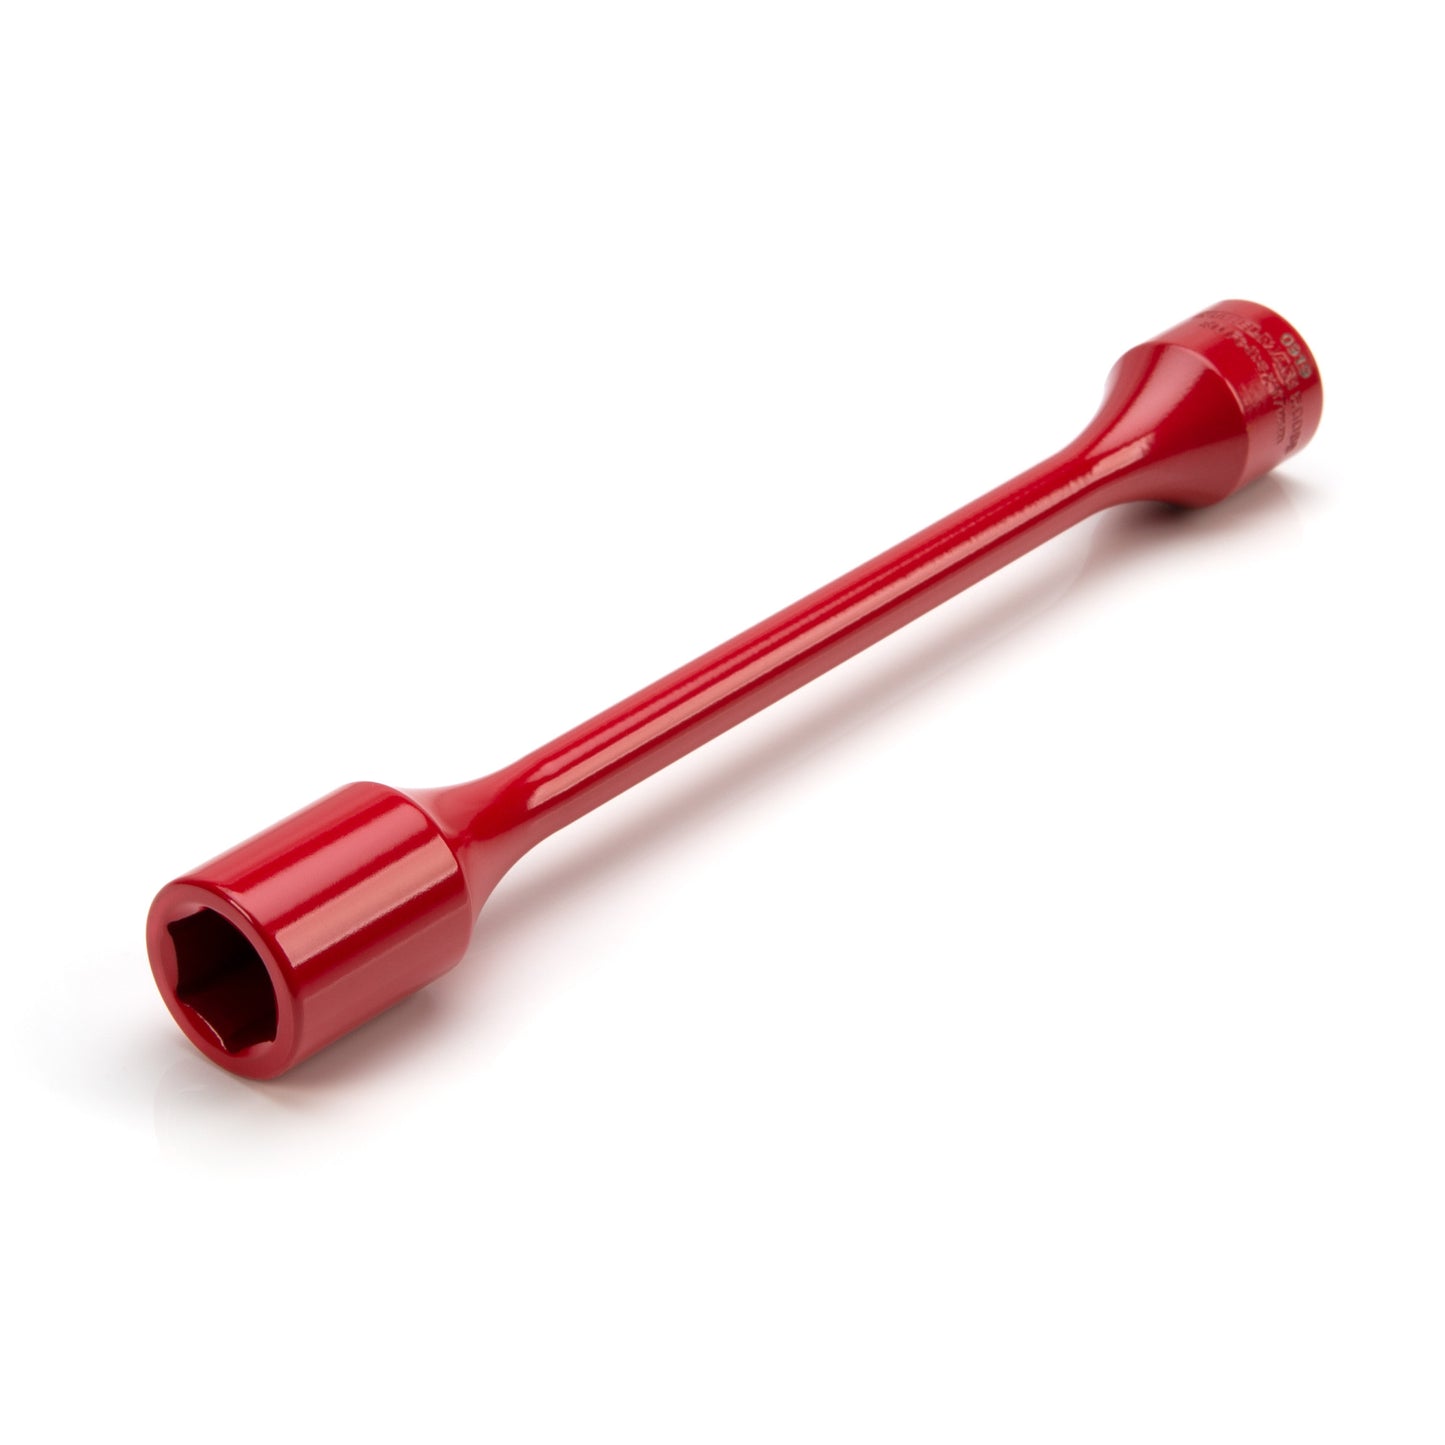 1/2-inch Drive x 17mm 80 ft-lb Torque Stick - Red